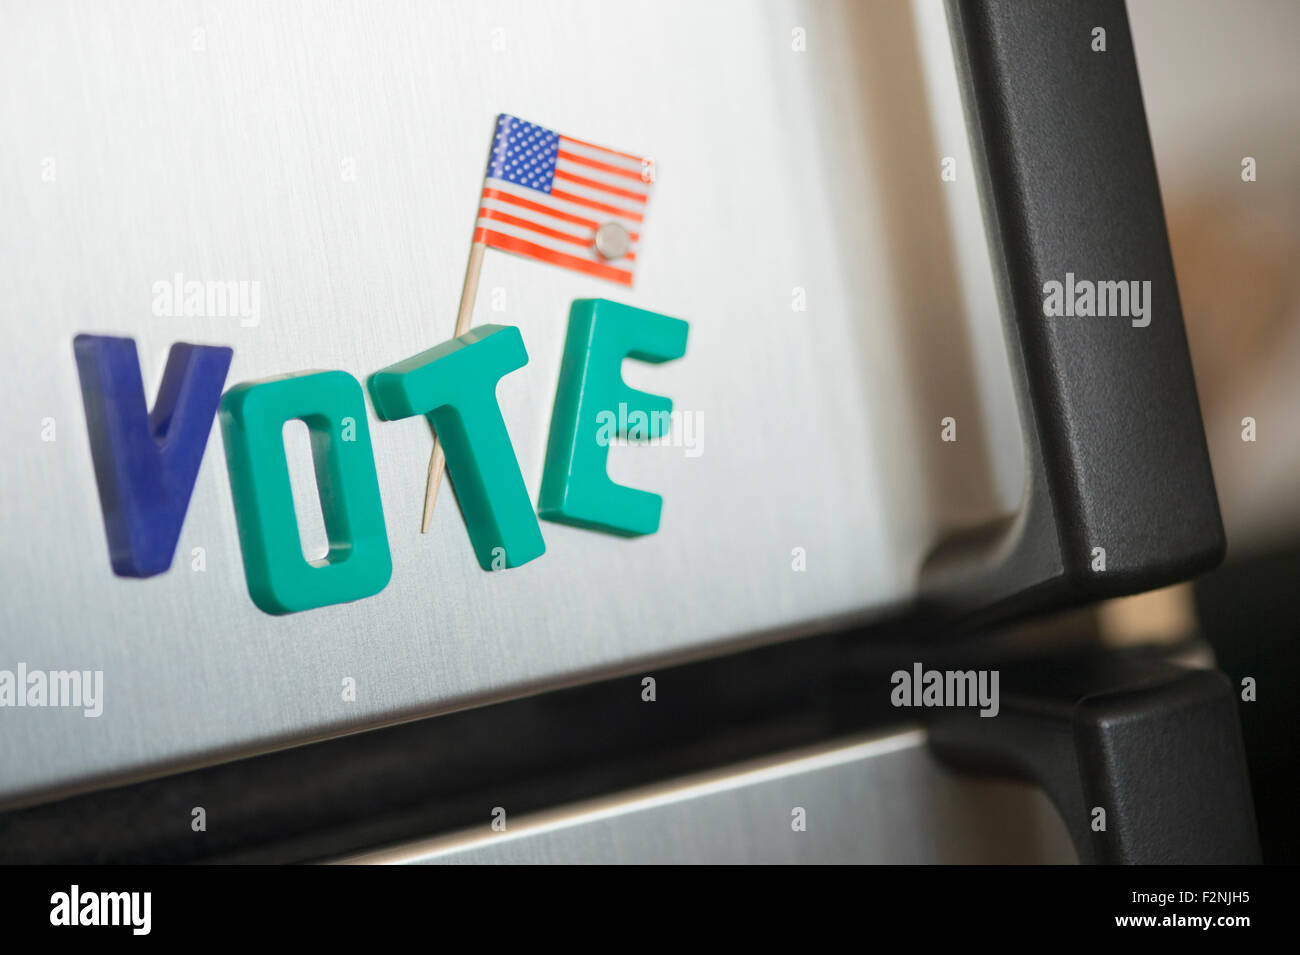 Close up of vote magnets and American flag on refrigerator Stock Photo